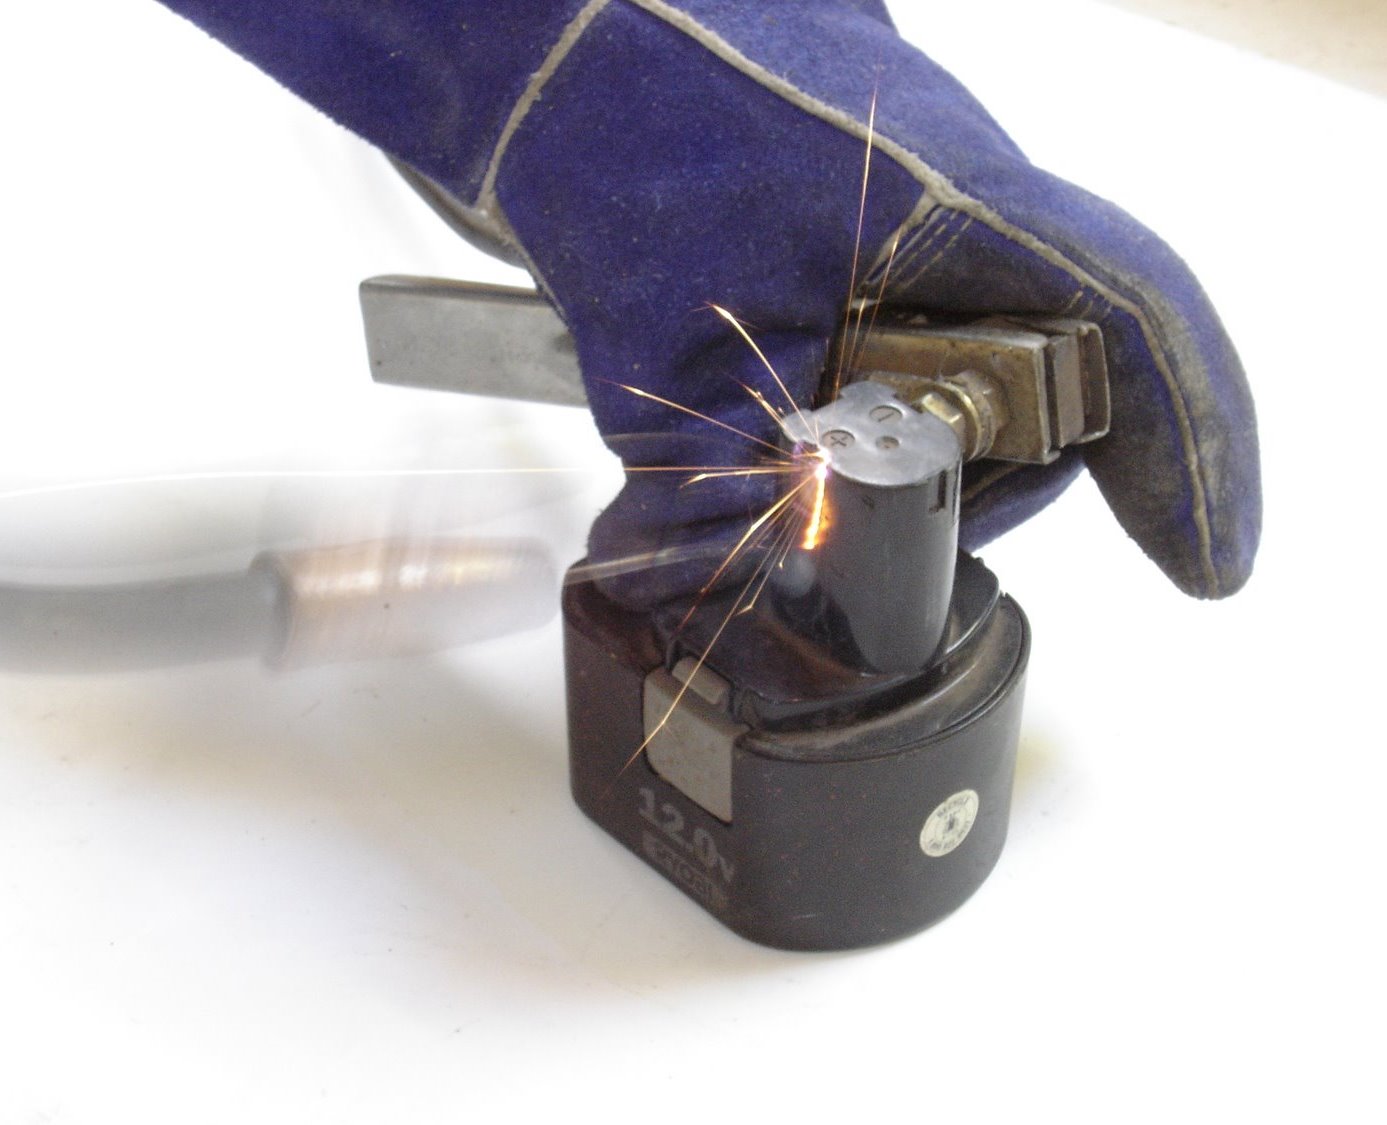 Revive Nicad Batteries by Zapping with a Welder